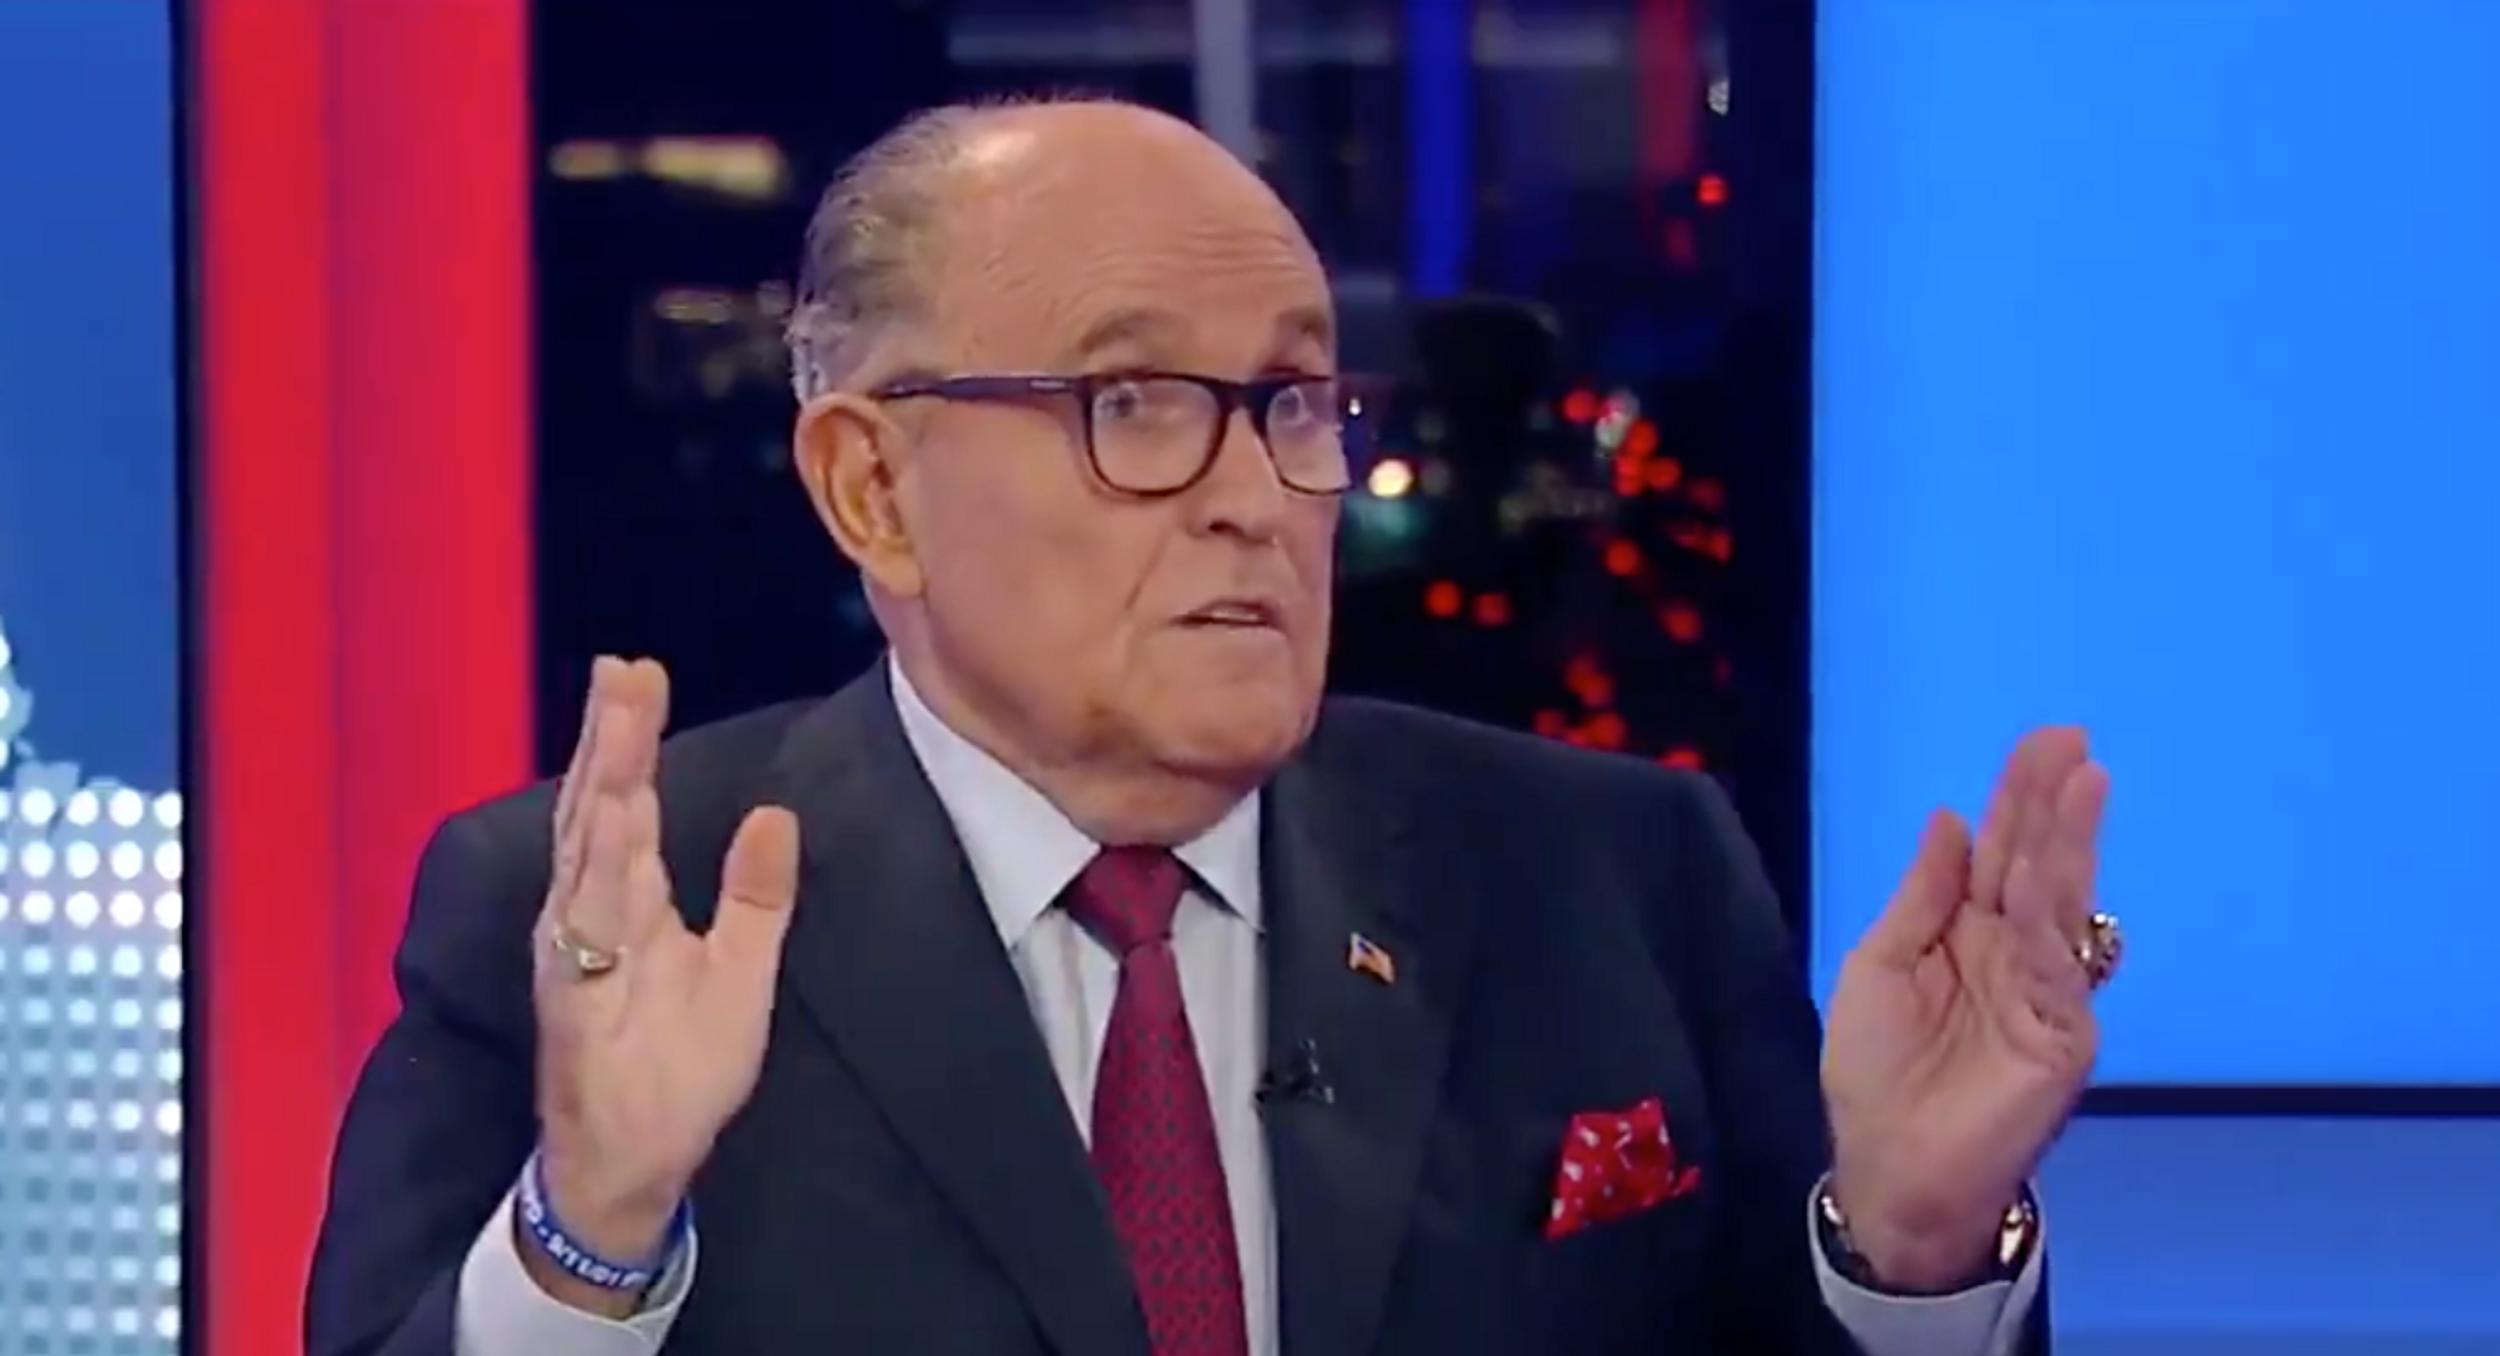 Rudy Giuliani Says Democrats 'Literally Want to Kill Me' Over Ukrainian Corruption Evidence He Claims to Have